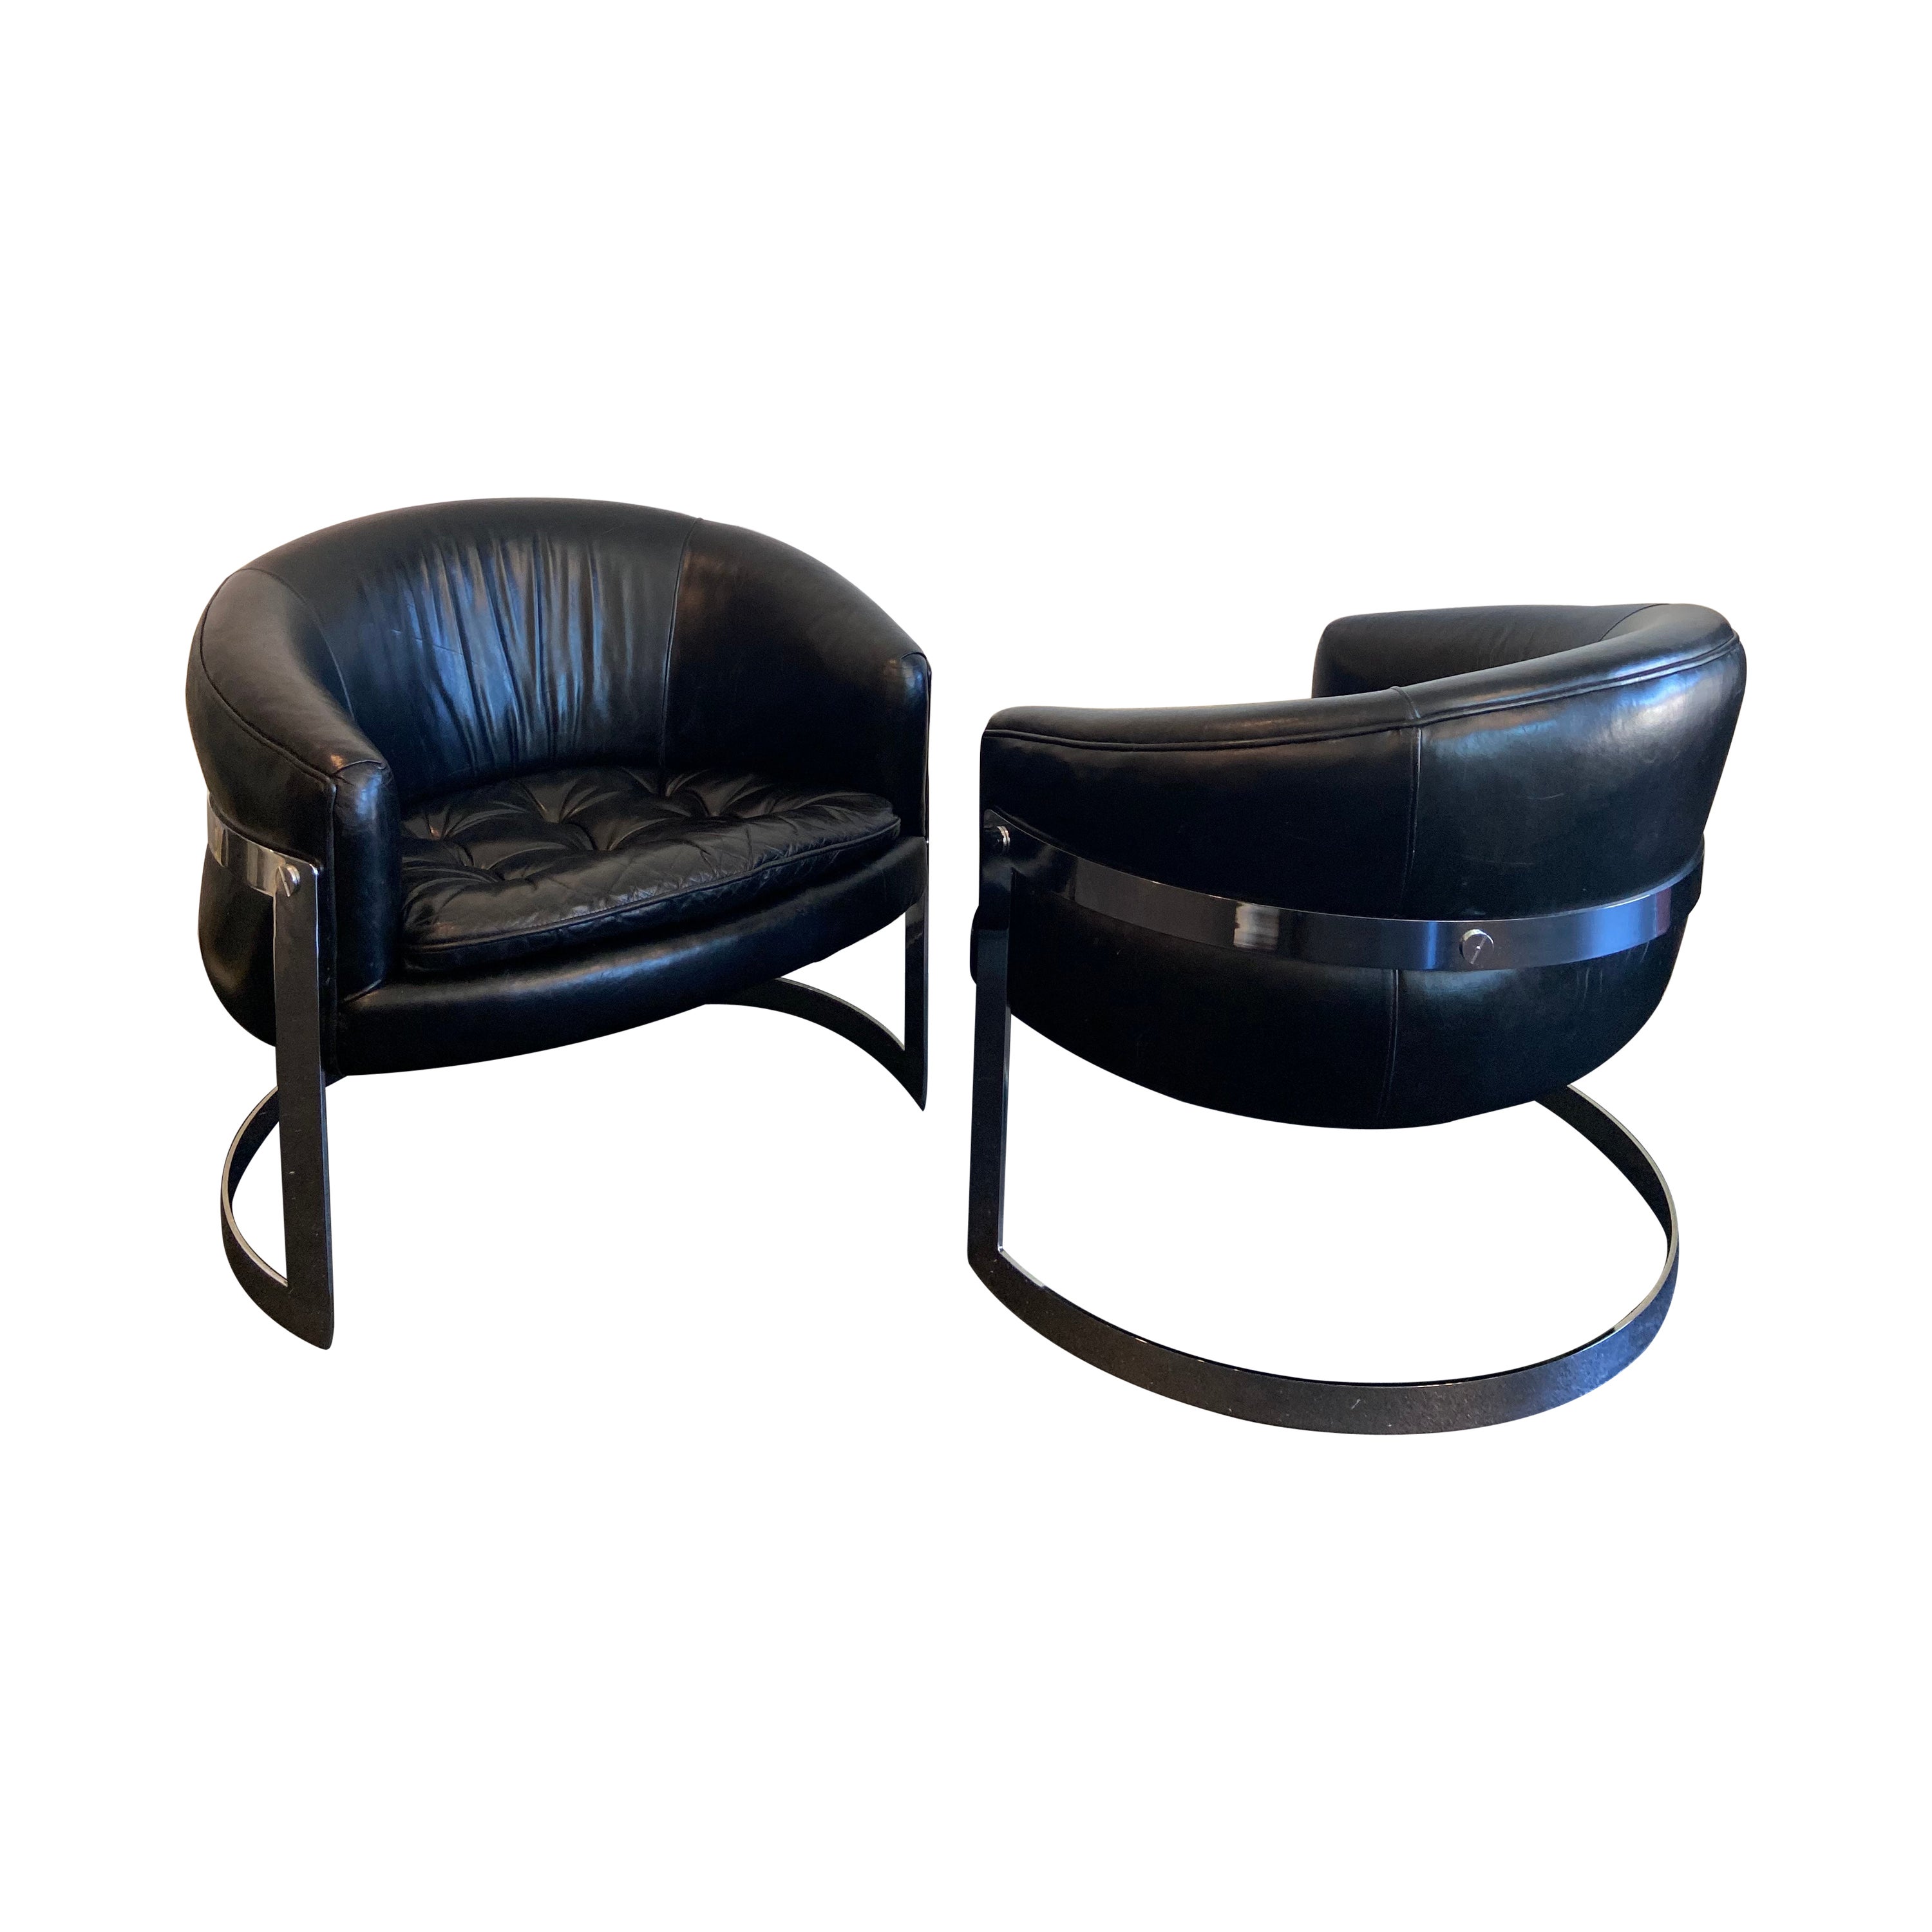 Flair Milo Baughman Style Chrome Cantilever Lounge Chairs In Leather- a Pair For Sale